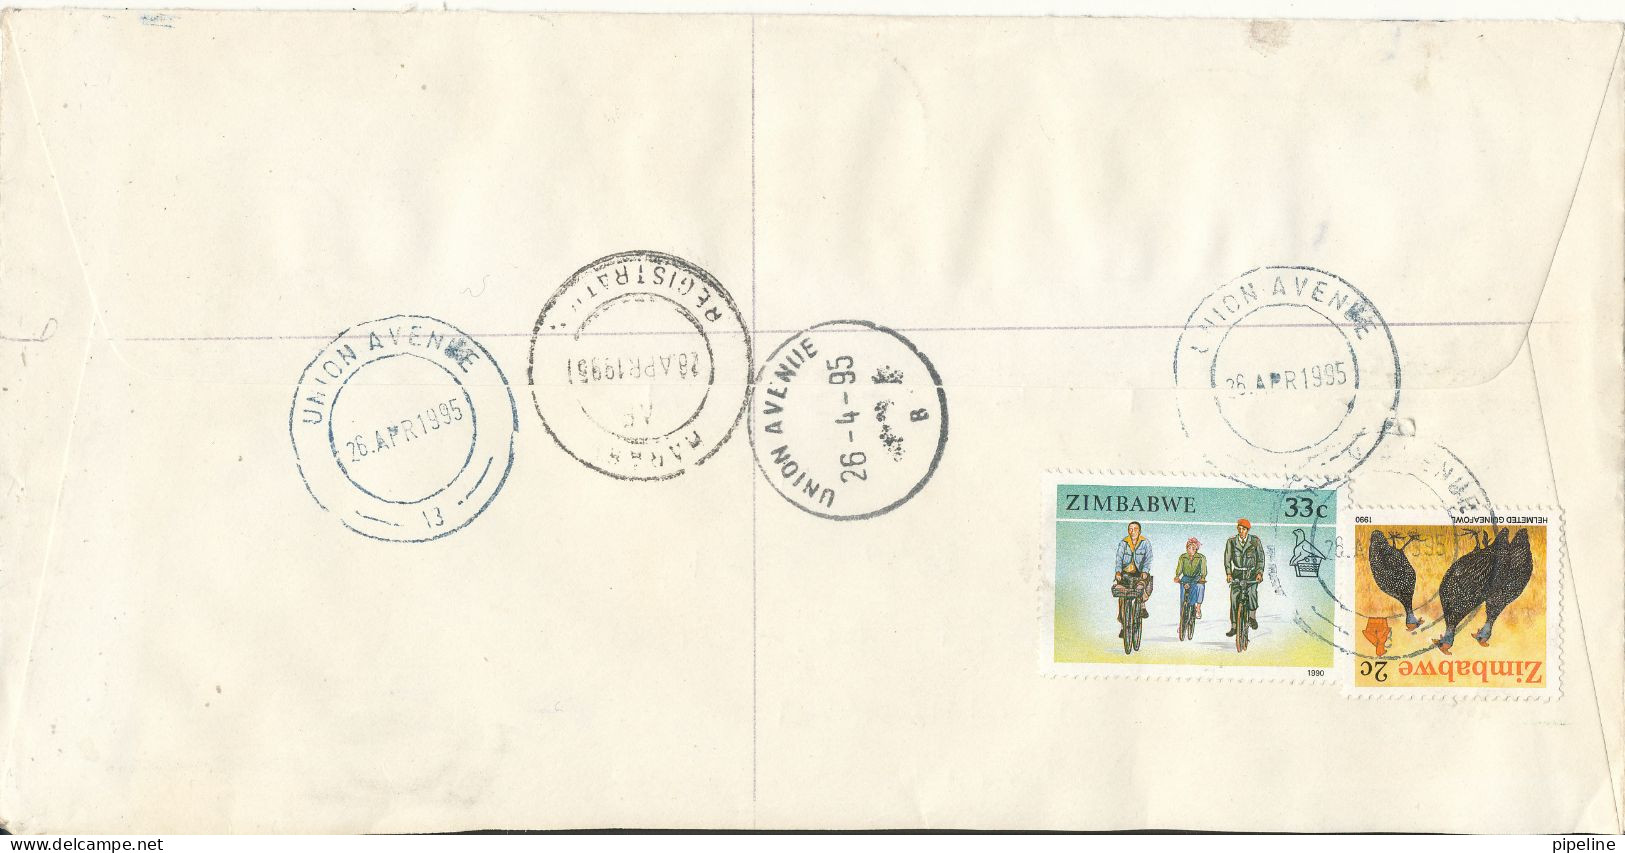 Zimbabwe Registered Cover Sent To Denmark 25-4-1995 (from UN Development Programme Harare) Stamps On Front And Back Side - Zimbabwe (1980-...)